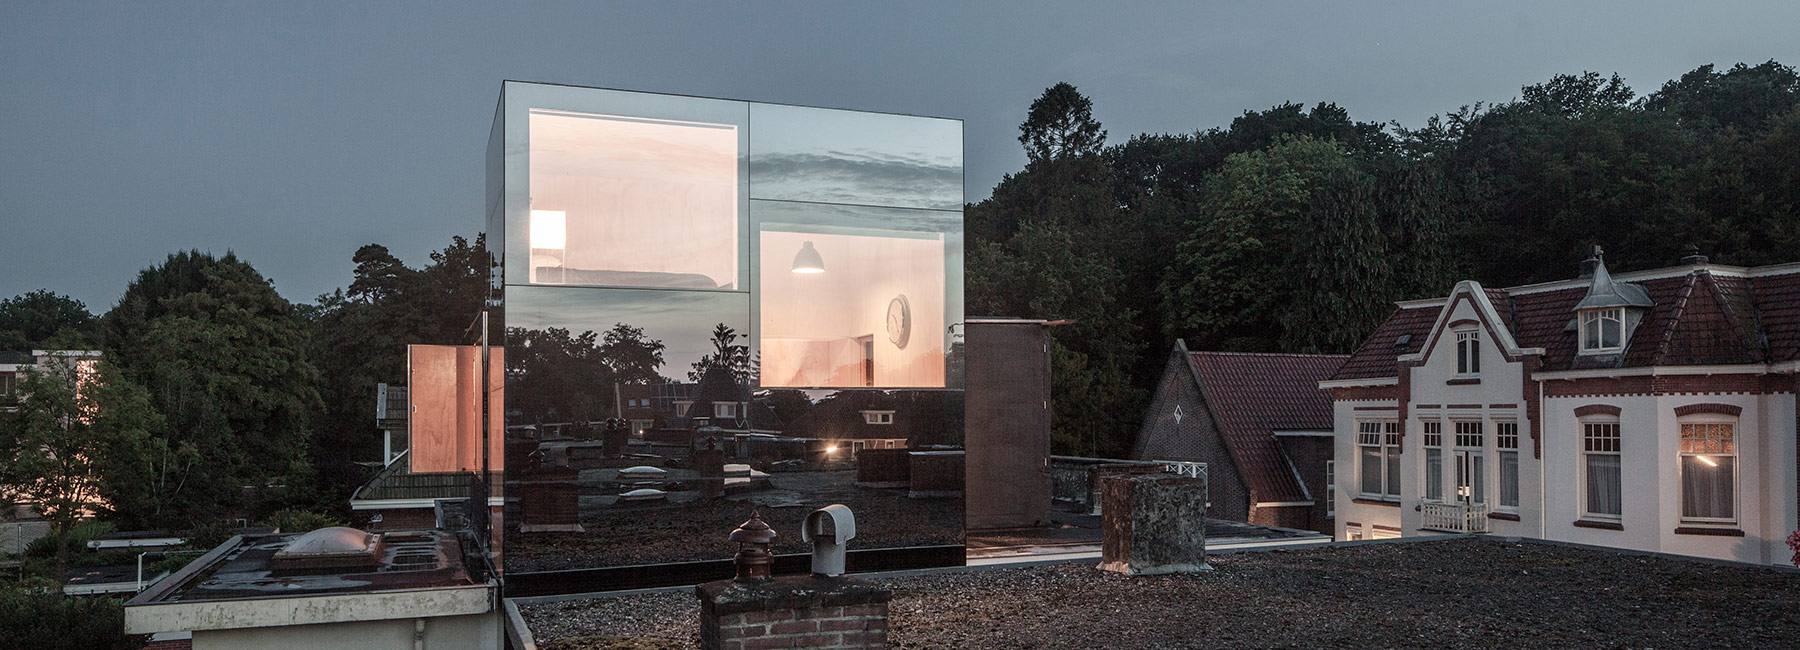 remco siebring's mirror mirror on a roof acts like a reflective tree house